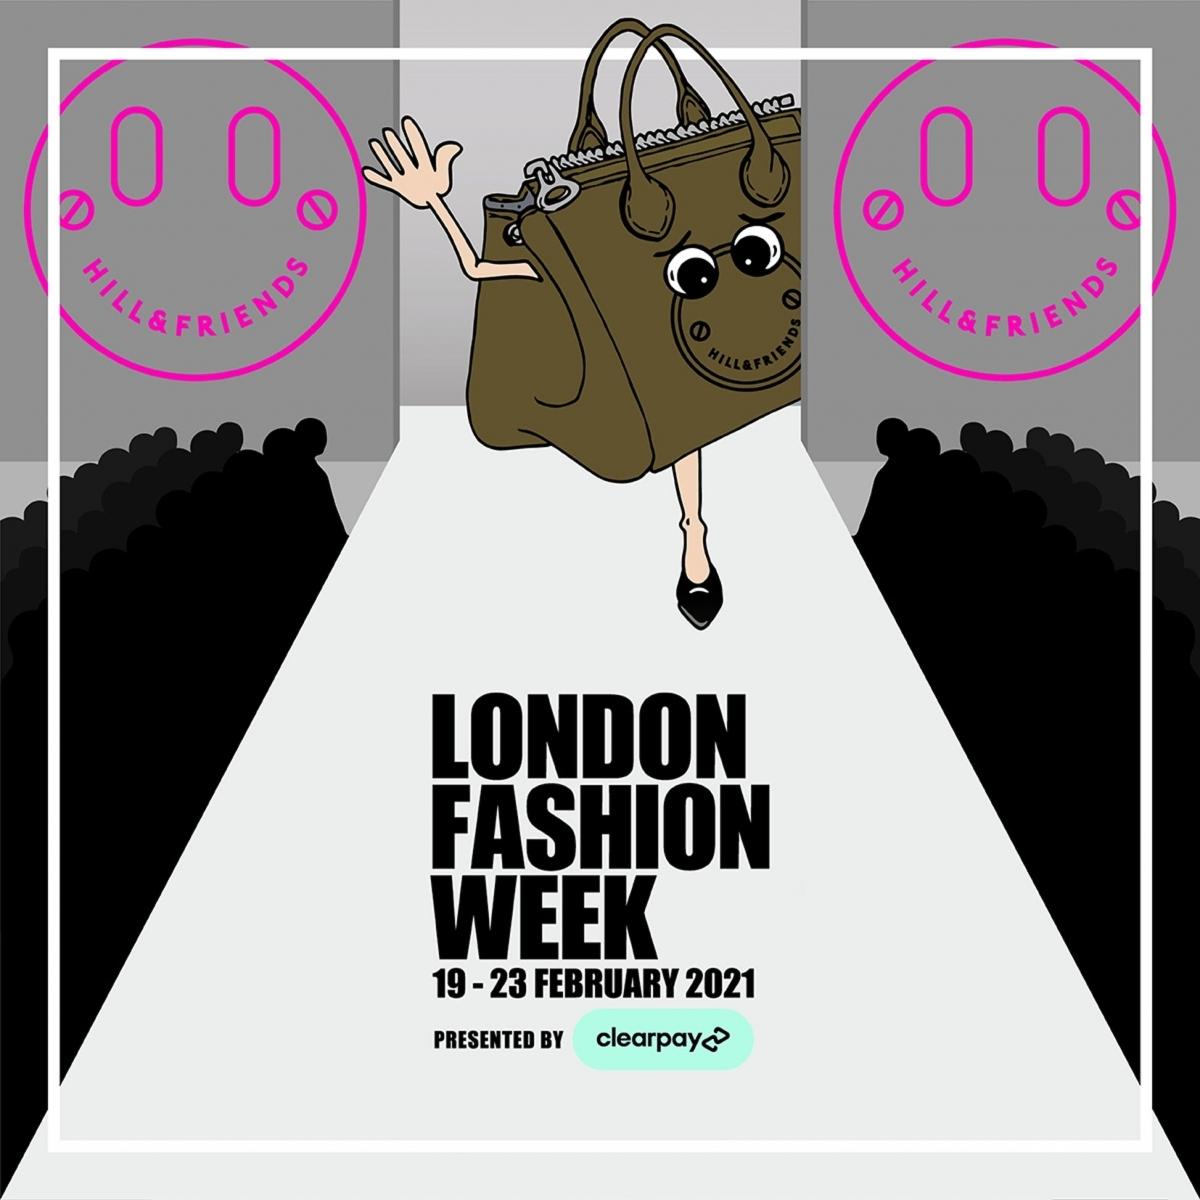 Hill and Friends Happy Bag and the Gang go to Fashion Week